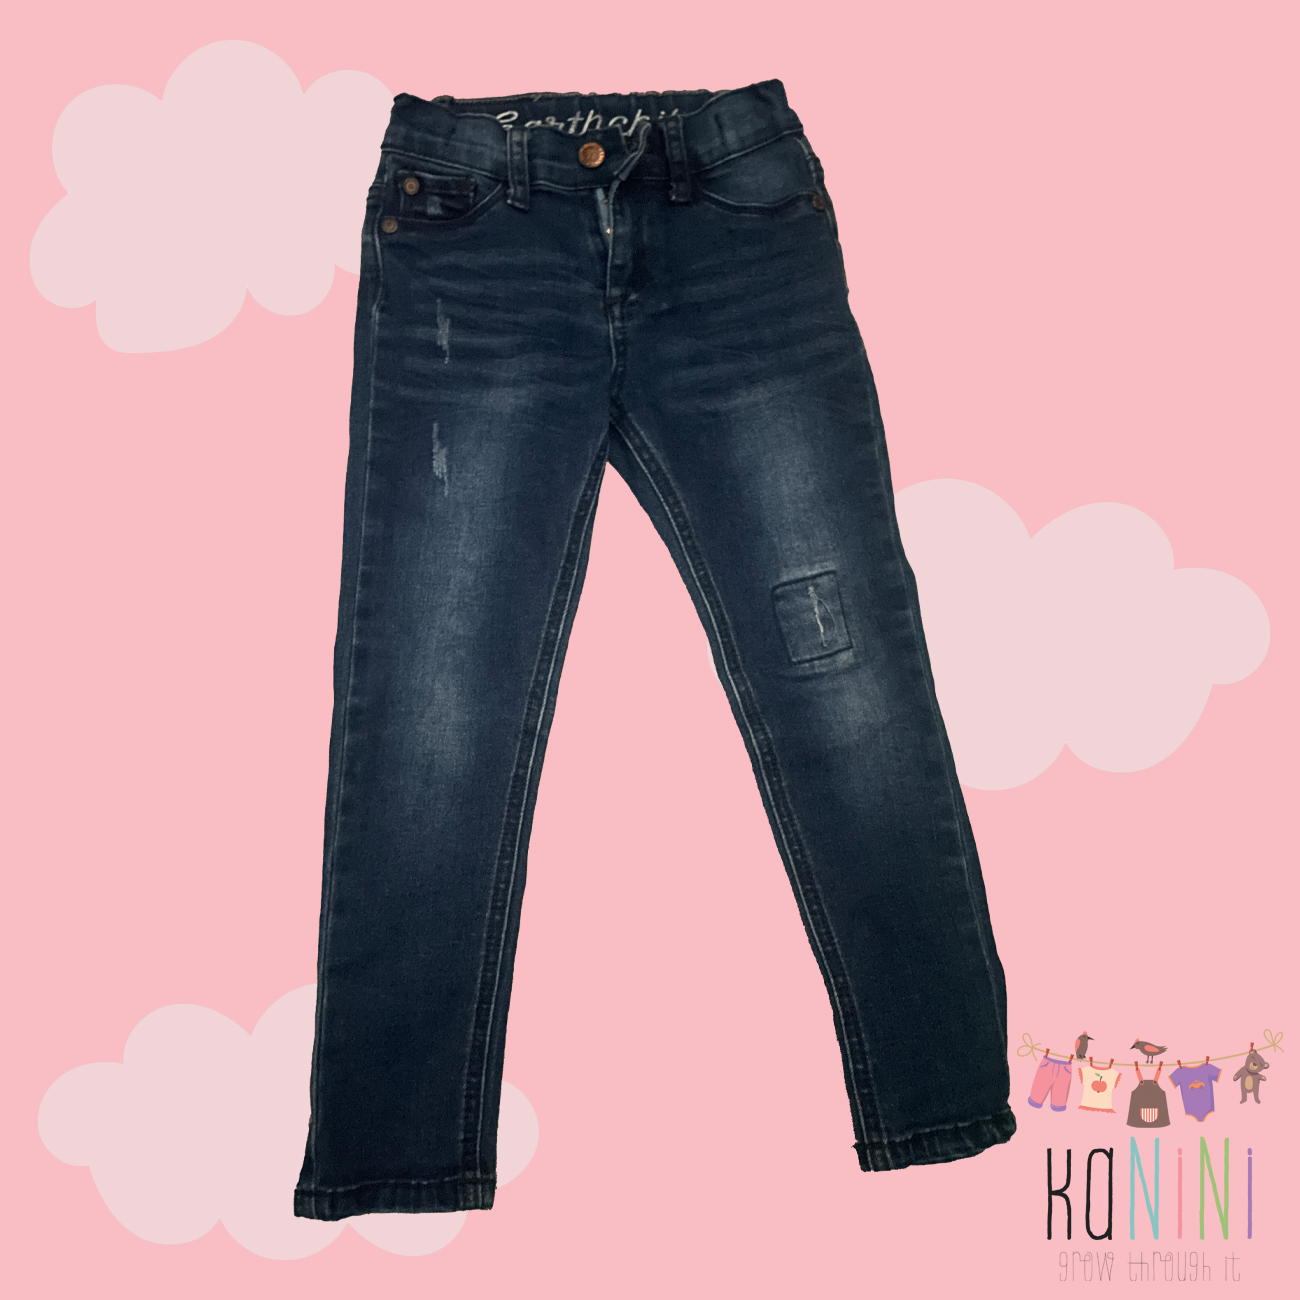 Featured image for “Earthchild 3 - 4 Years Girls Skinny Jeans”